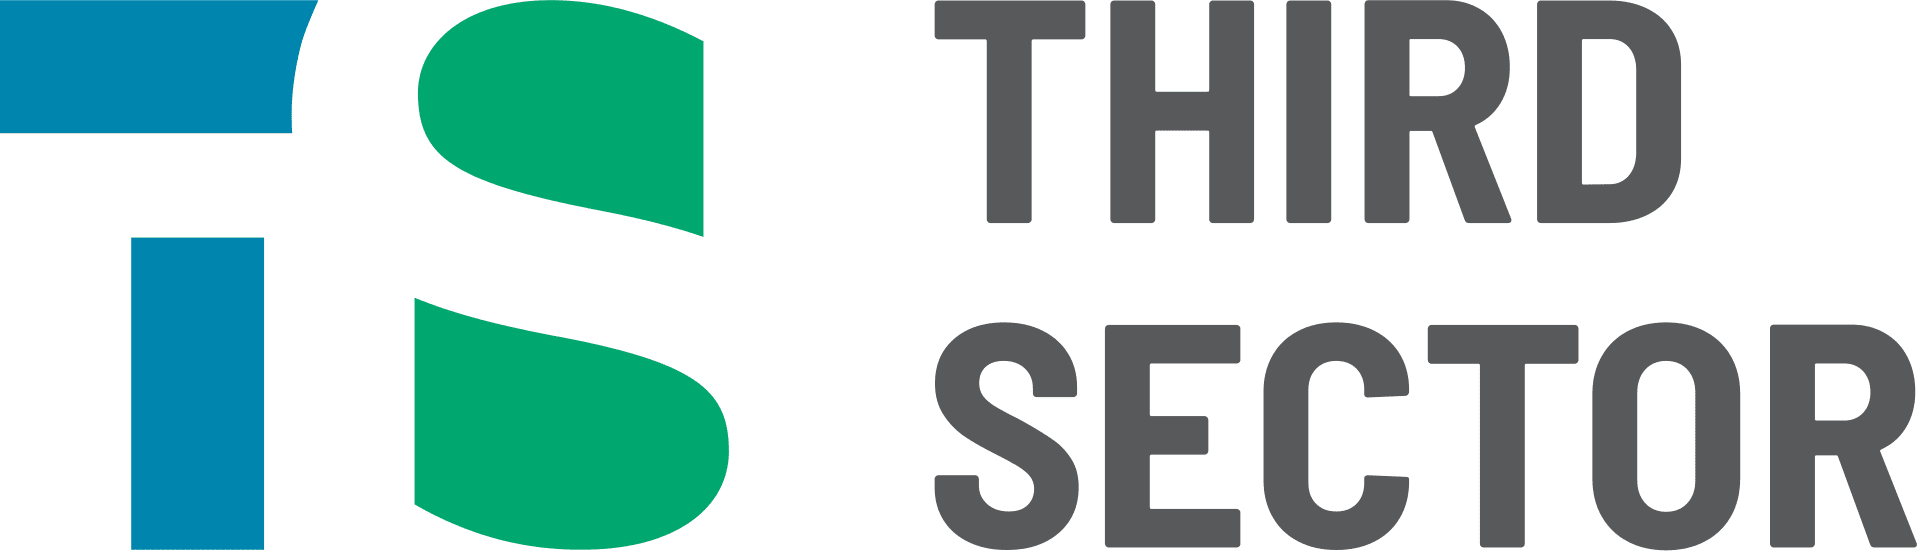 Third Sector Capital Partners